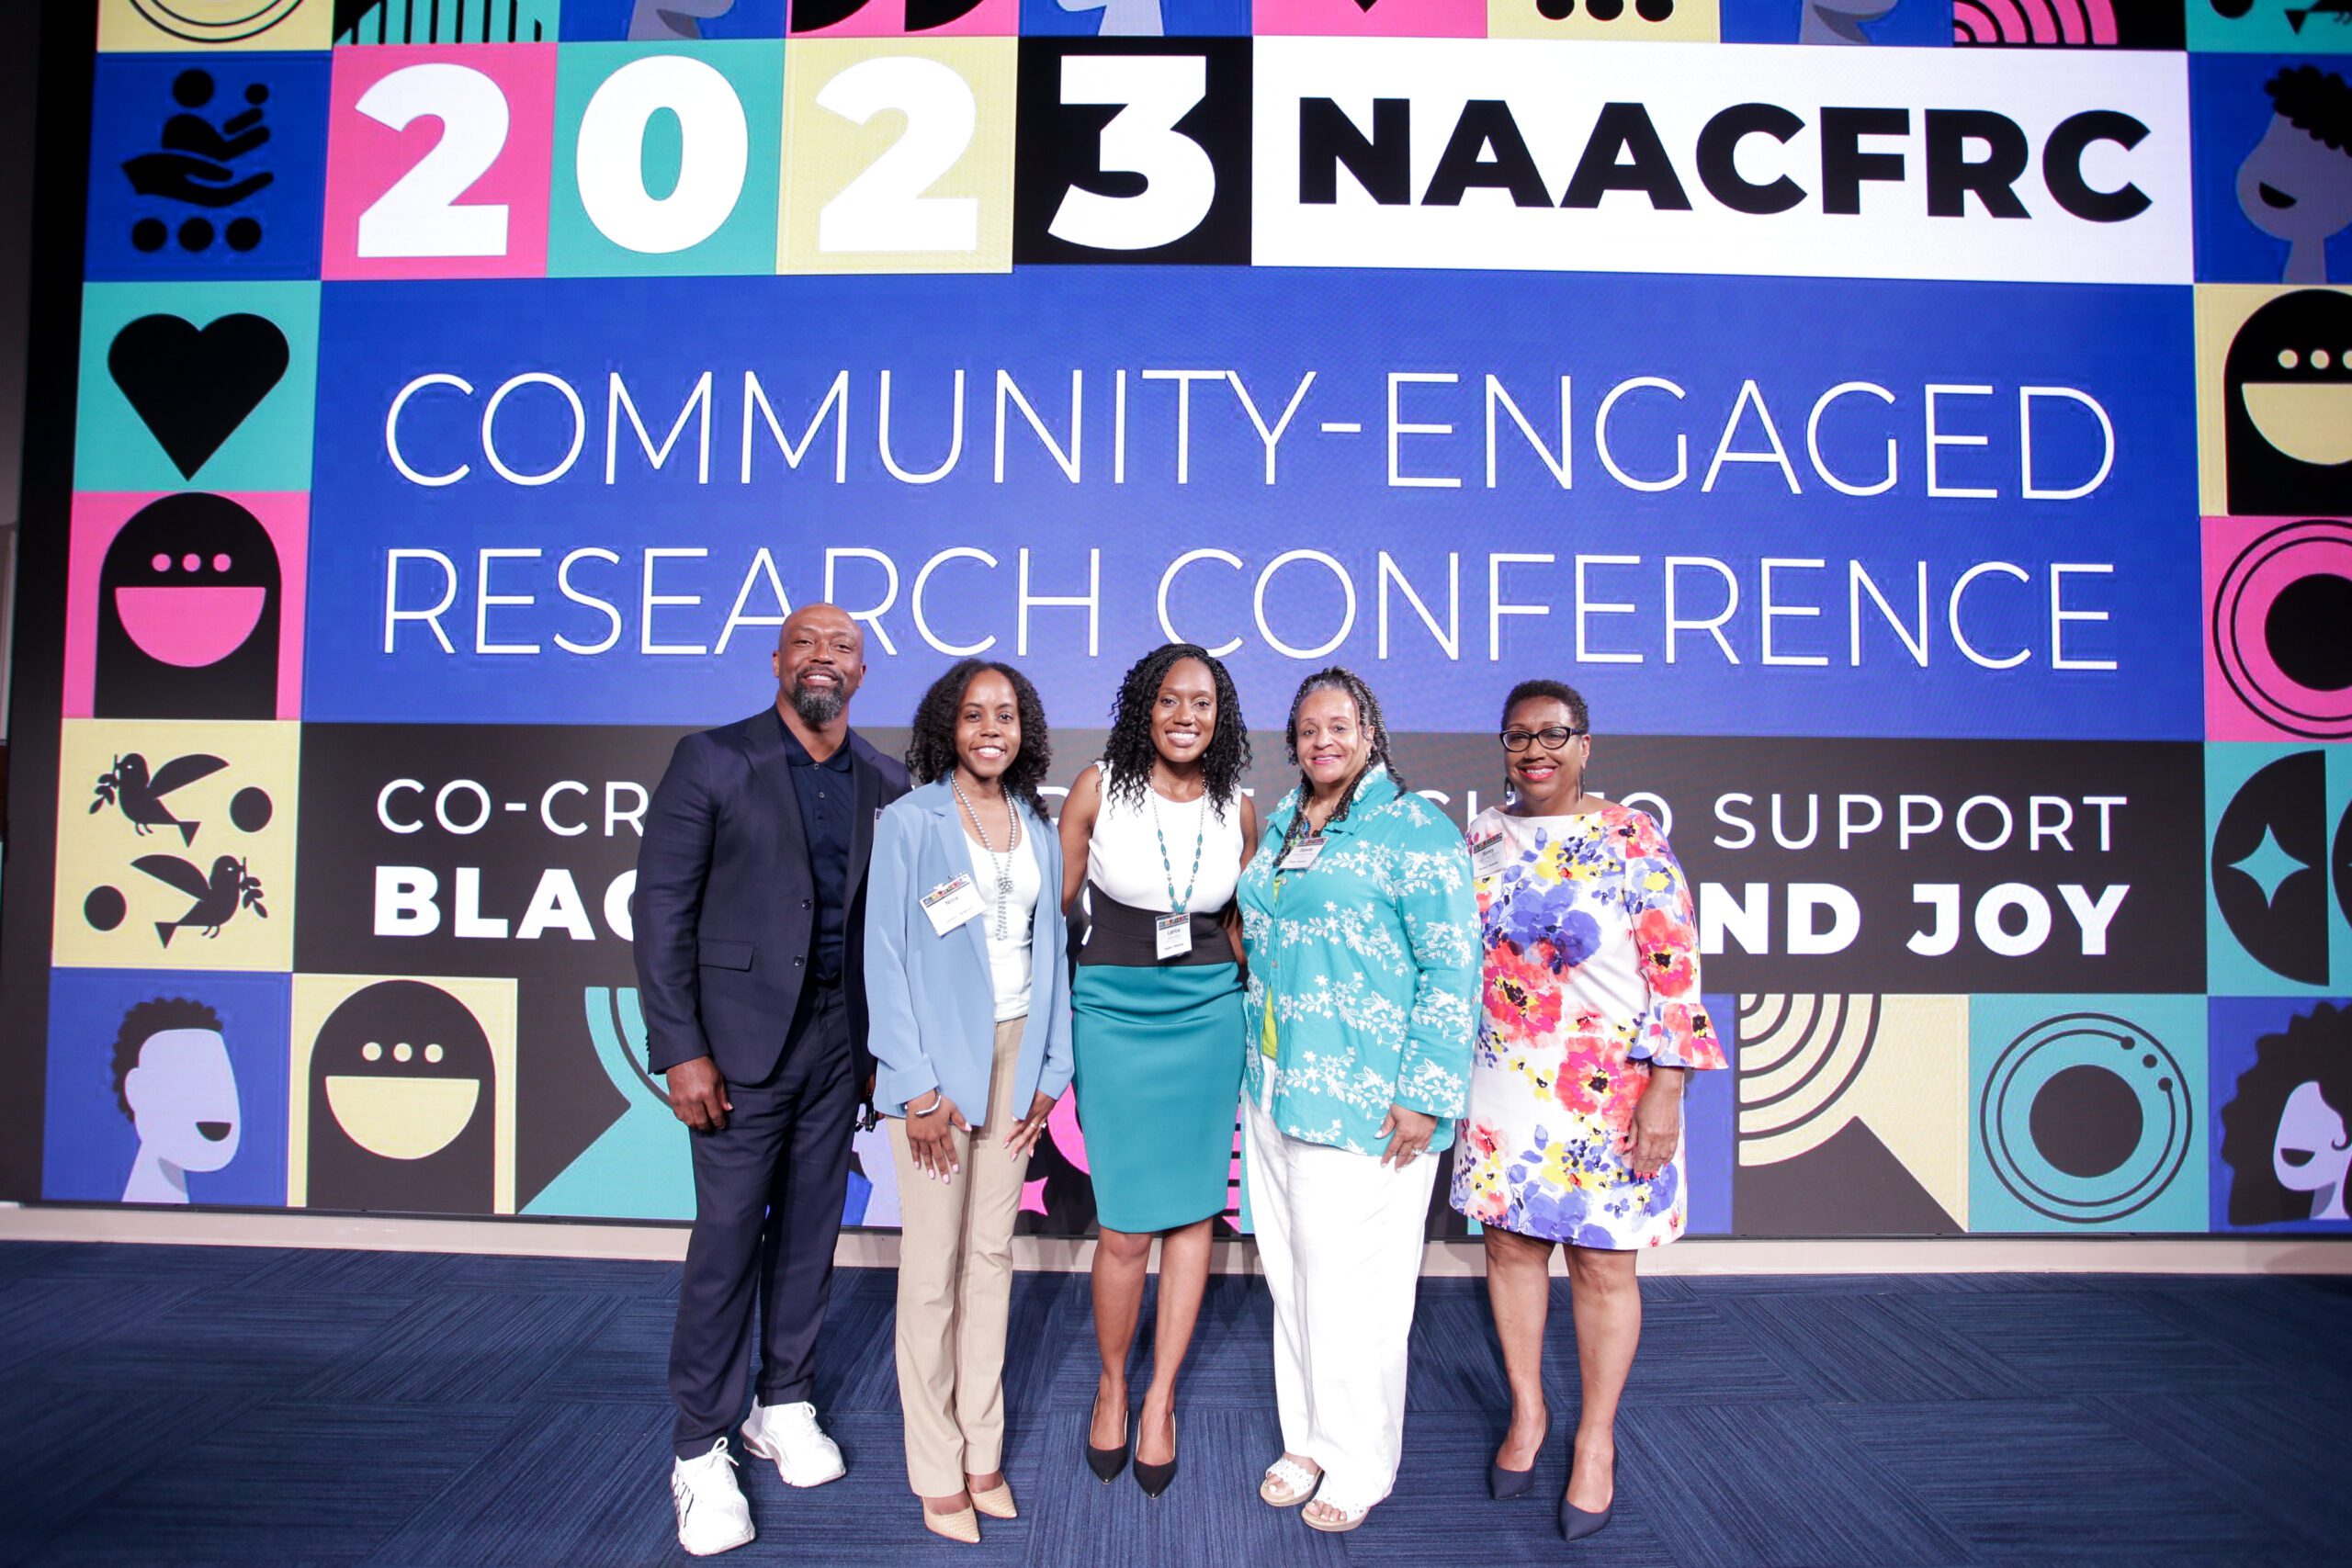 NAACFRC Annual Conference 2023 Panelist